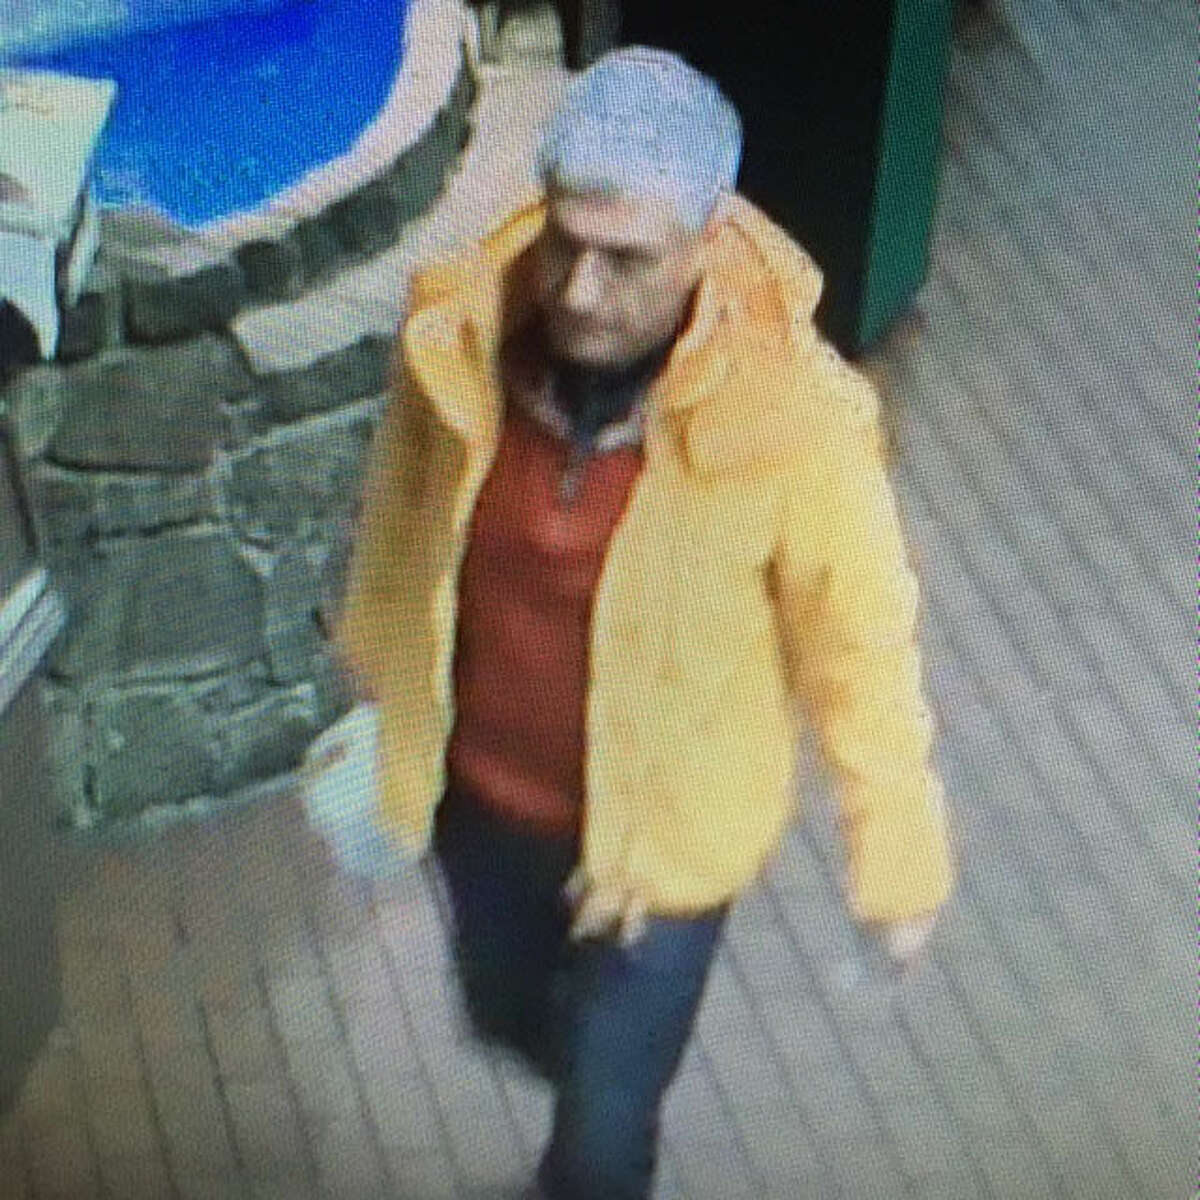 Police are looking for a man who they say stole a purse from Stew Leonard's on Dec. 2.